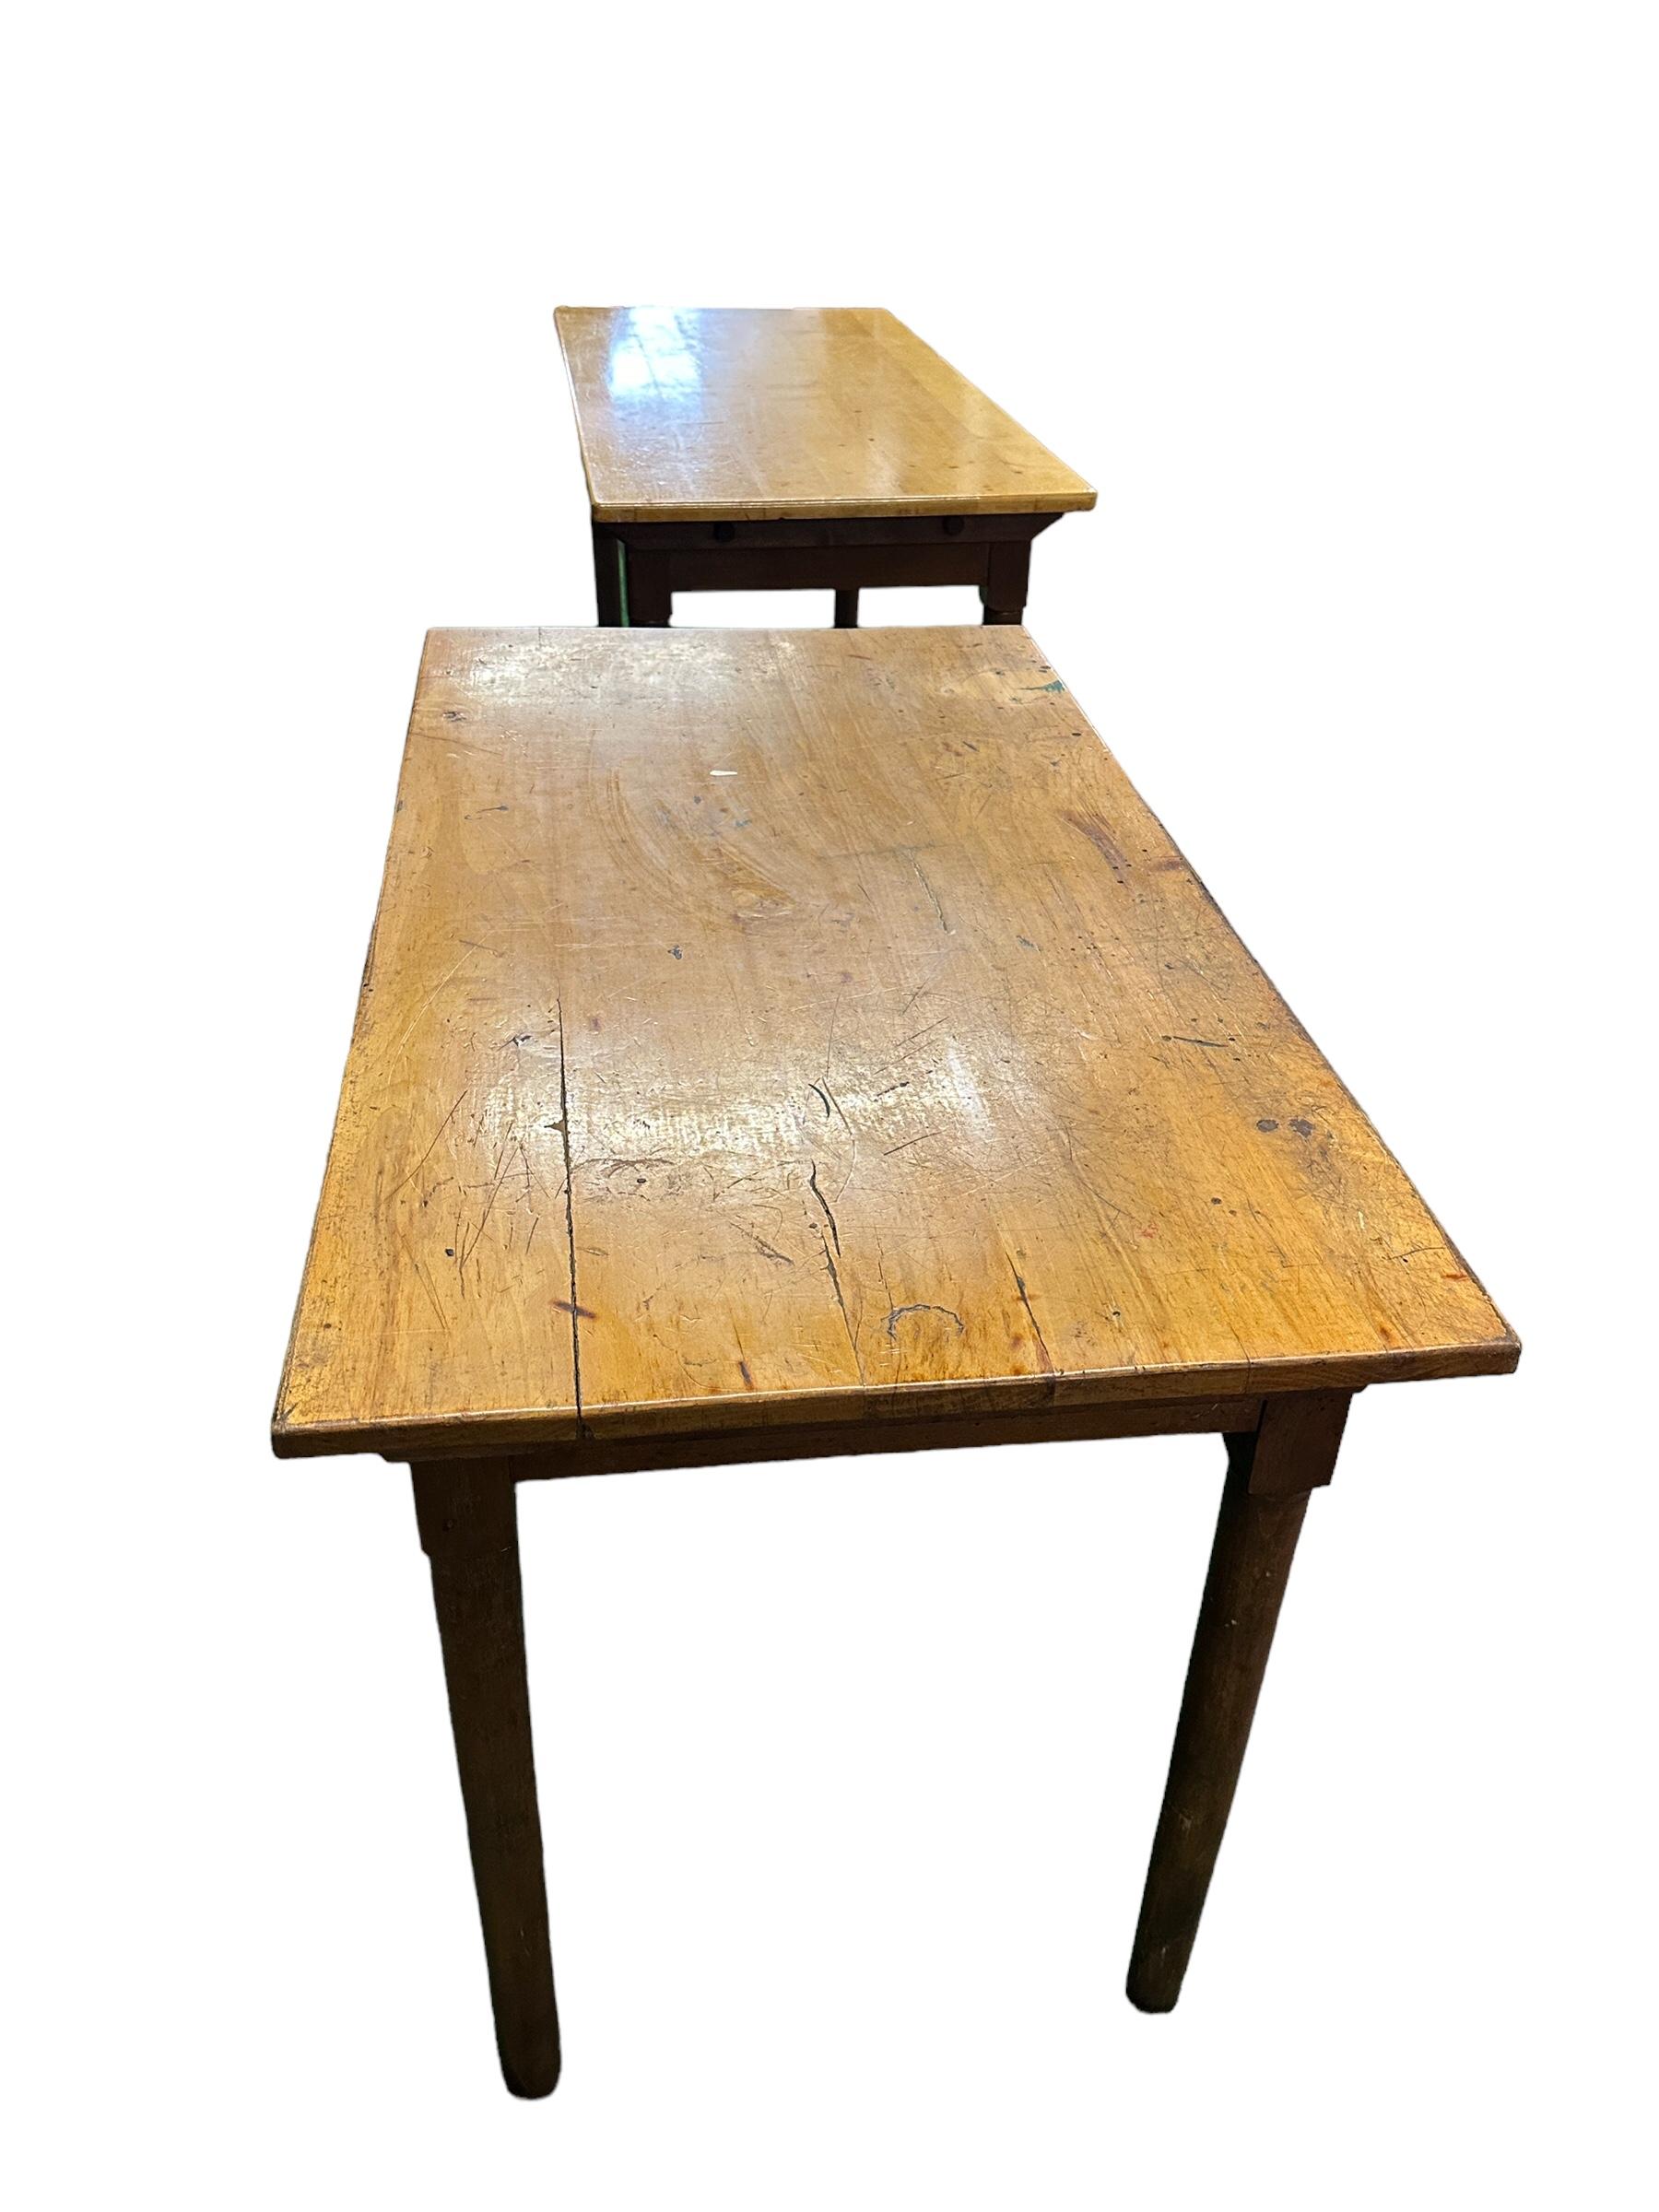 Folk Art Cottage Farm Tavern Table out of Humbser Brewery Fürth Bavaria 1950s For Sale 2